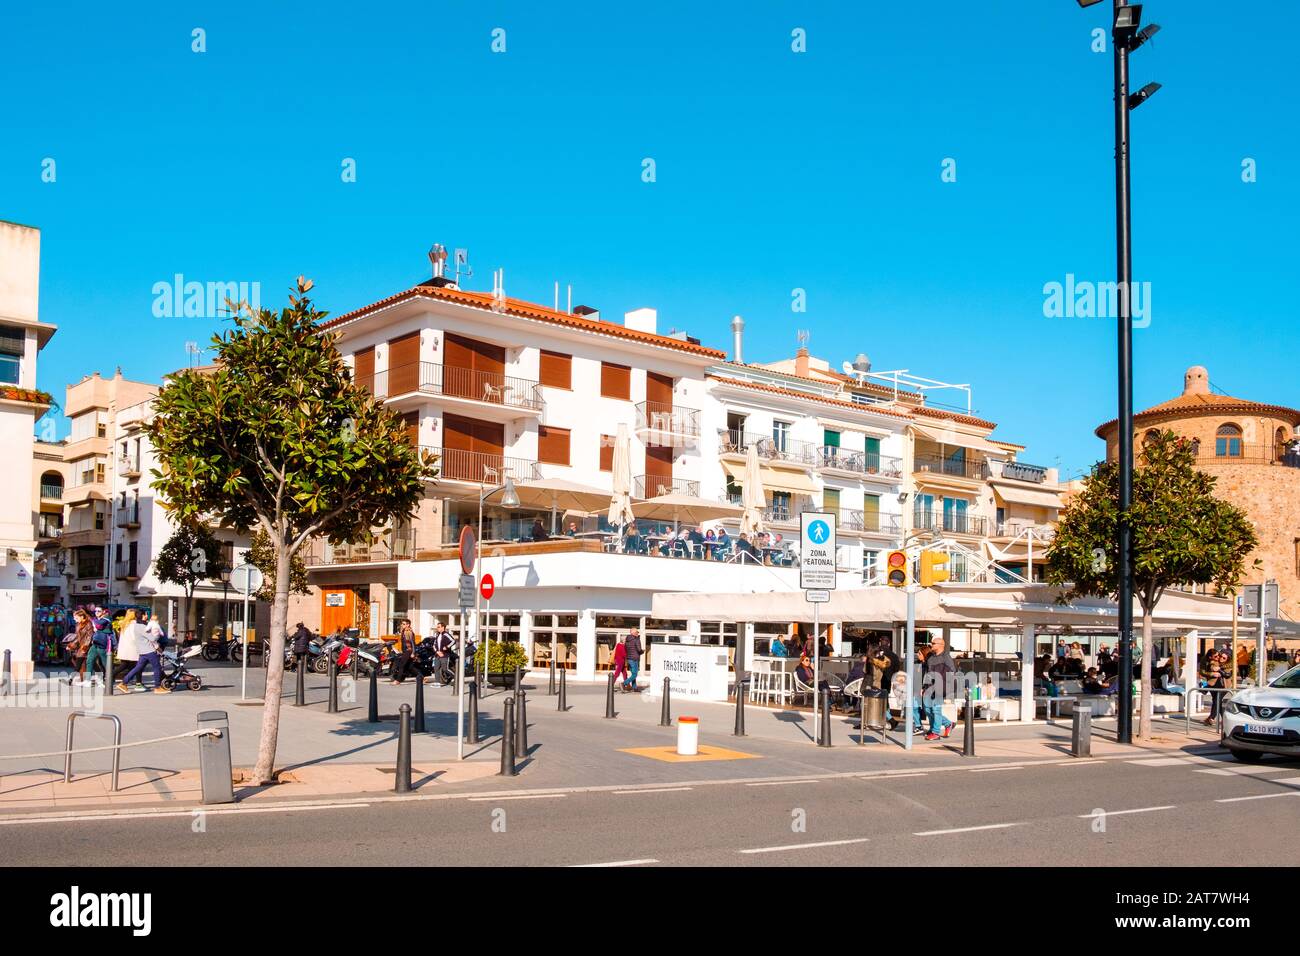 CAMBRILS, SPAIN - JANUARY 26, 2020: A view over the seafront of Cambrils, in the famous Costa Daurada coast, Spain, highlighting a medieval round towe Stock Photo